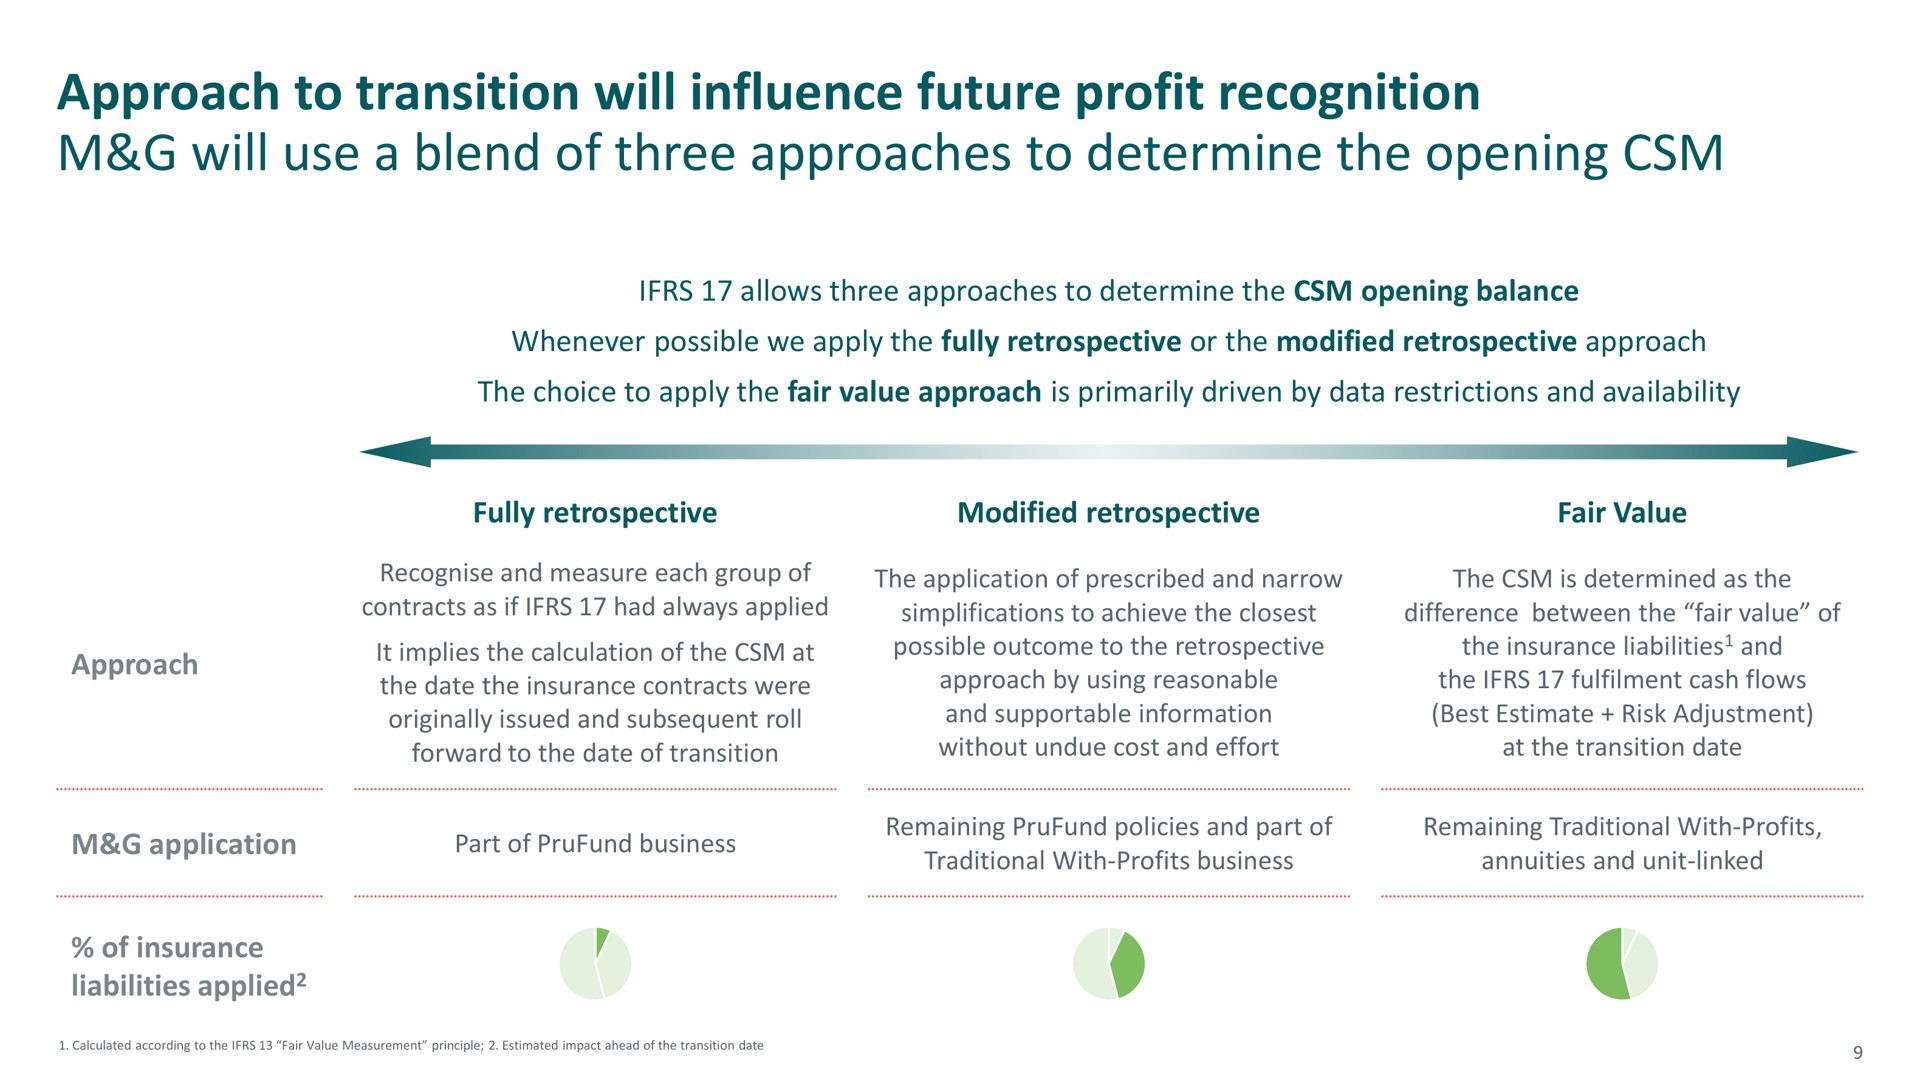 approach to transition will influence future profit recognition will use a blend of three approaches to determine the opening | M&G